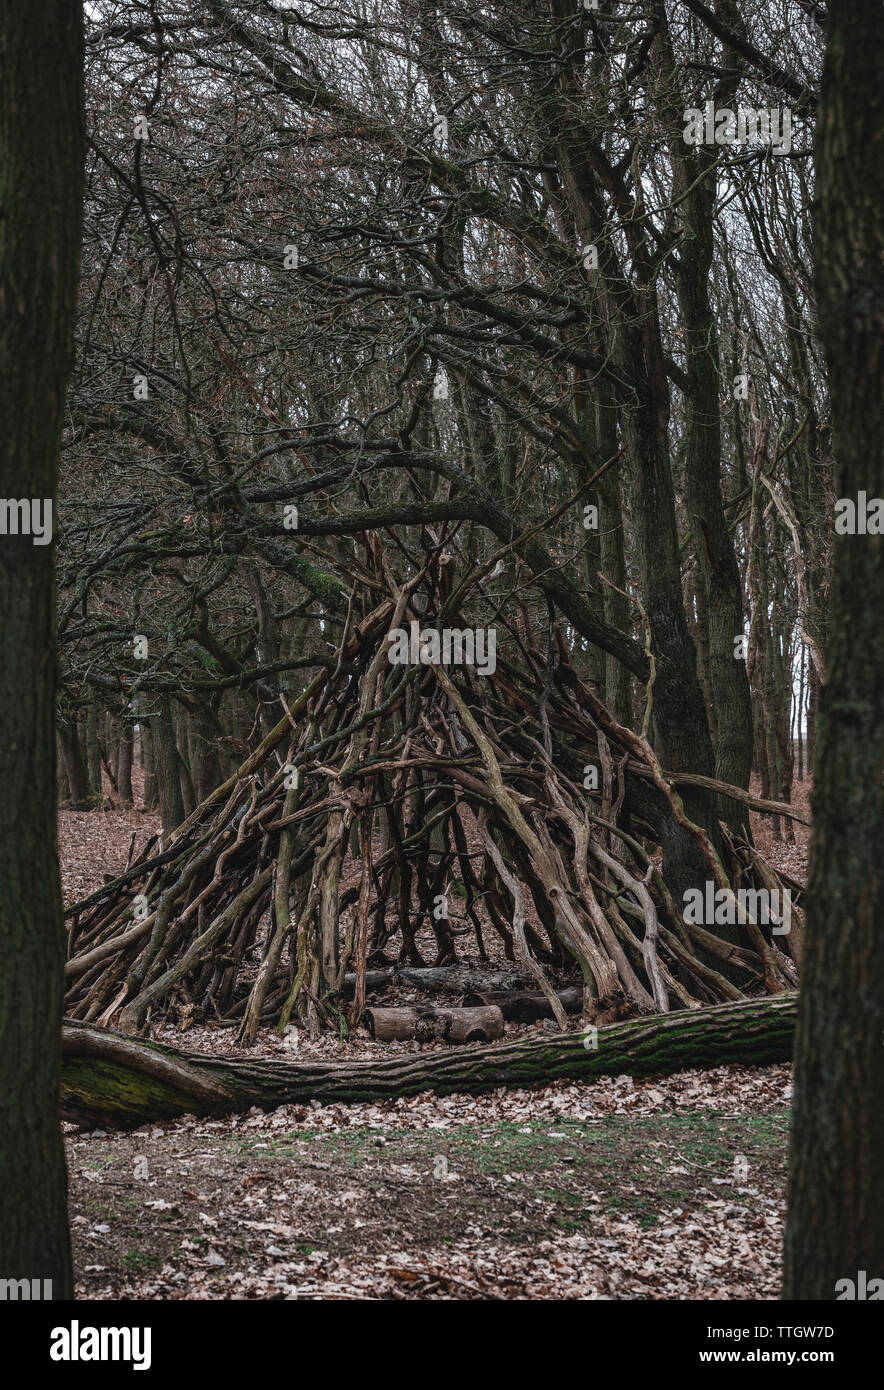 Shelter with branches for animals in the forest. Stock Photo